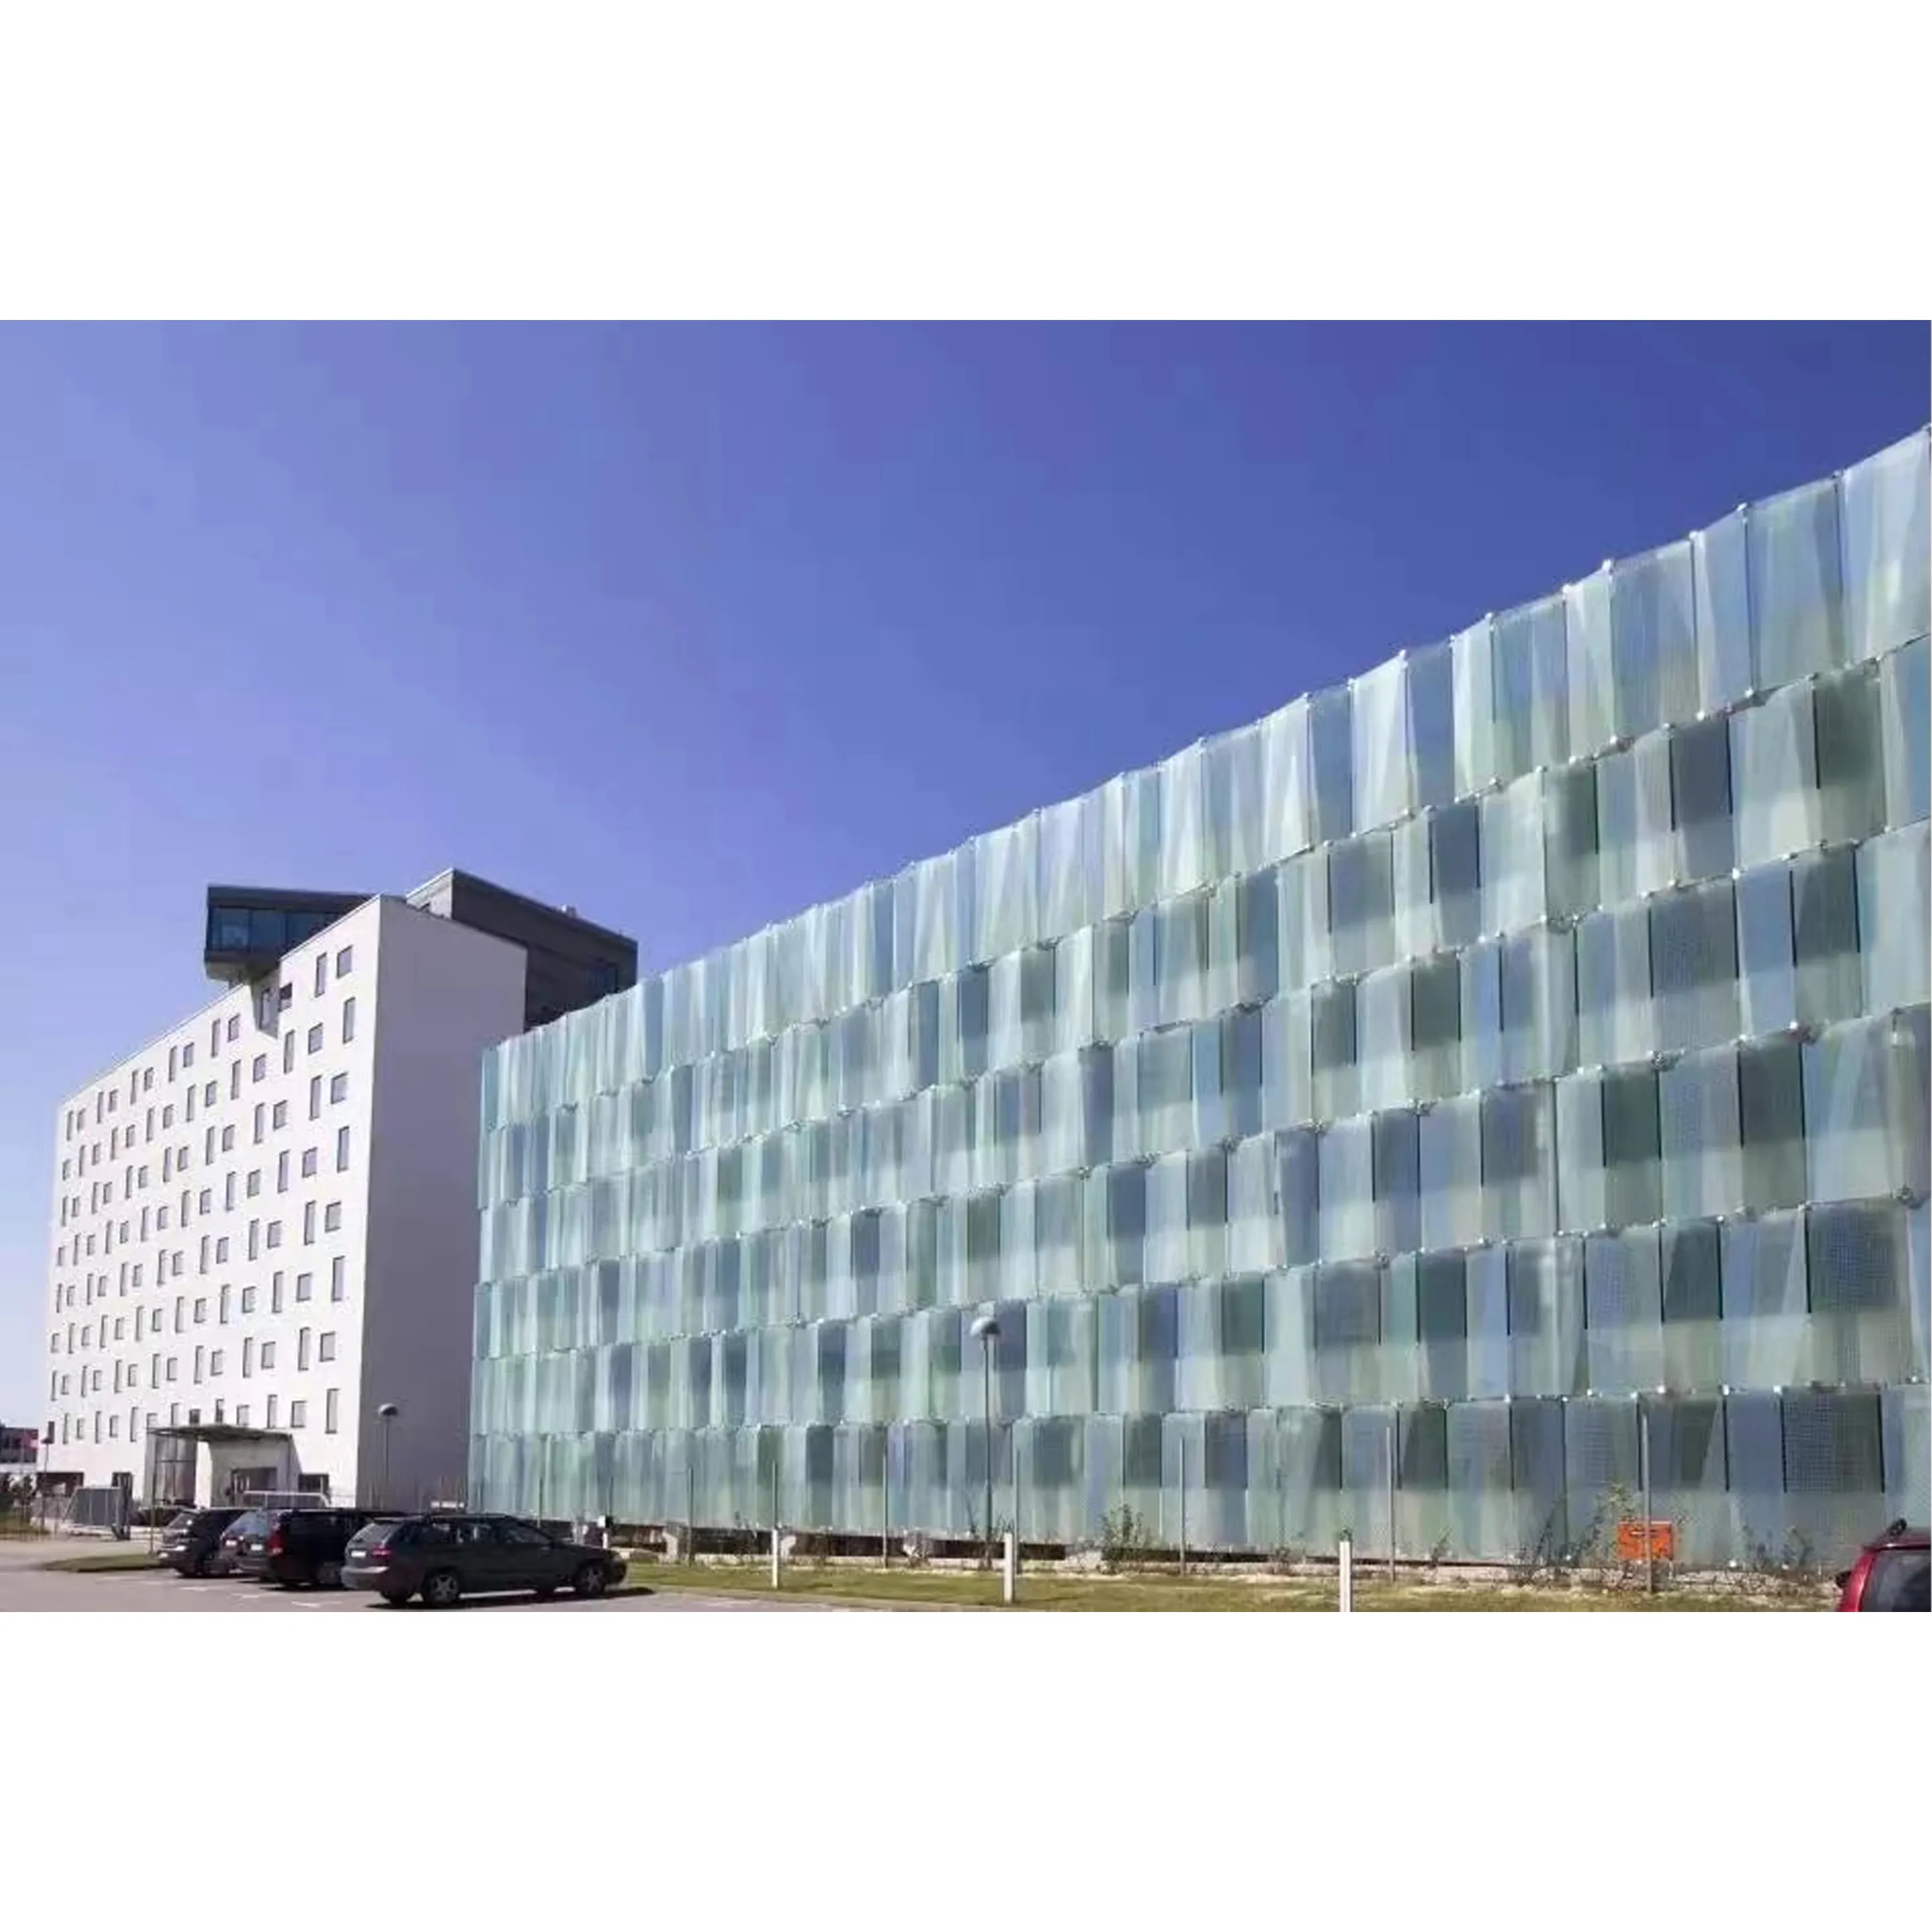 Tempered laminated glass facade curtain glazing system external wall aluminum toughened glass curtain wall cost per sq ft